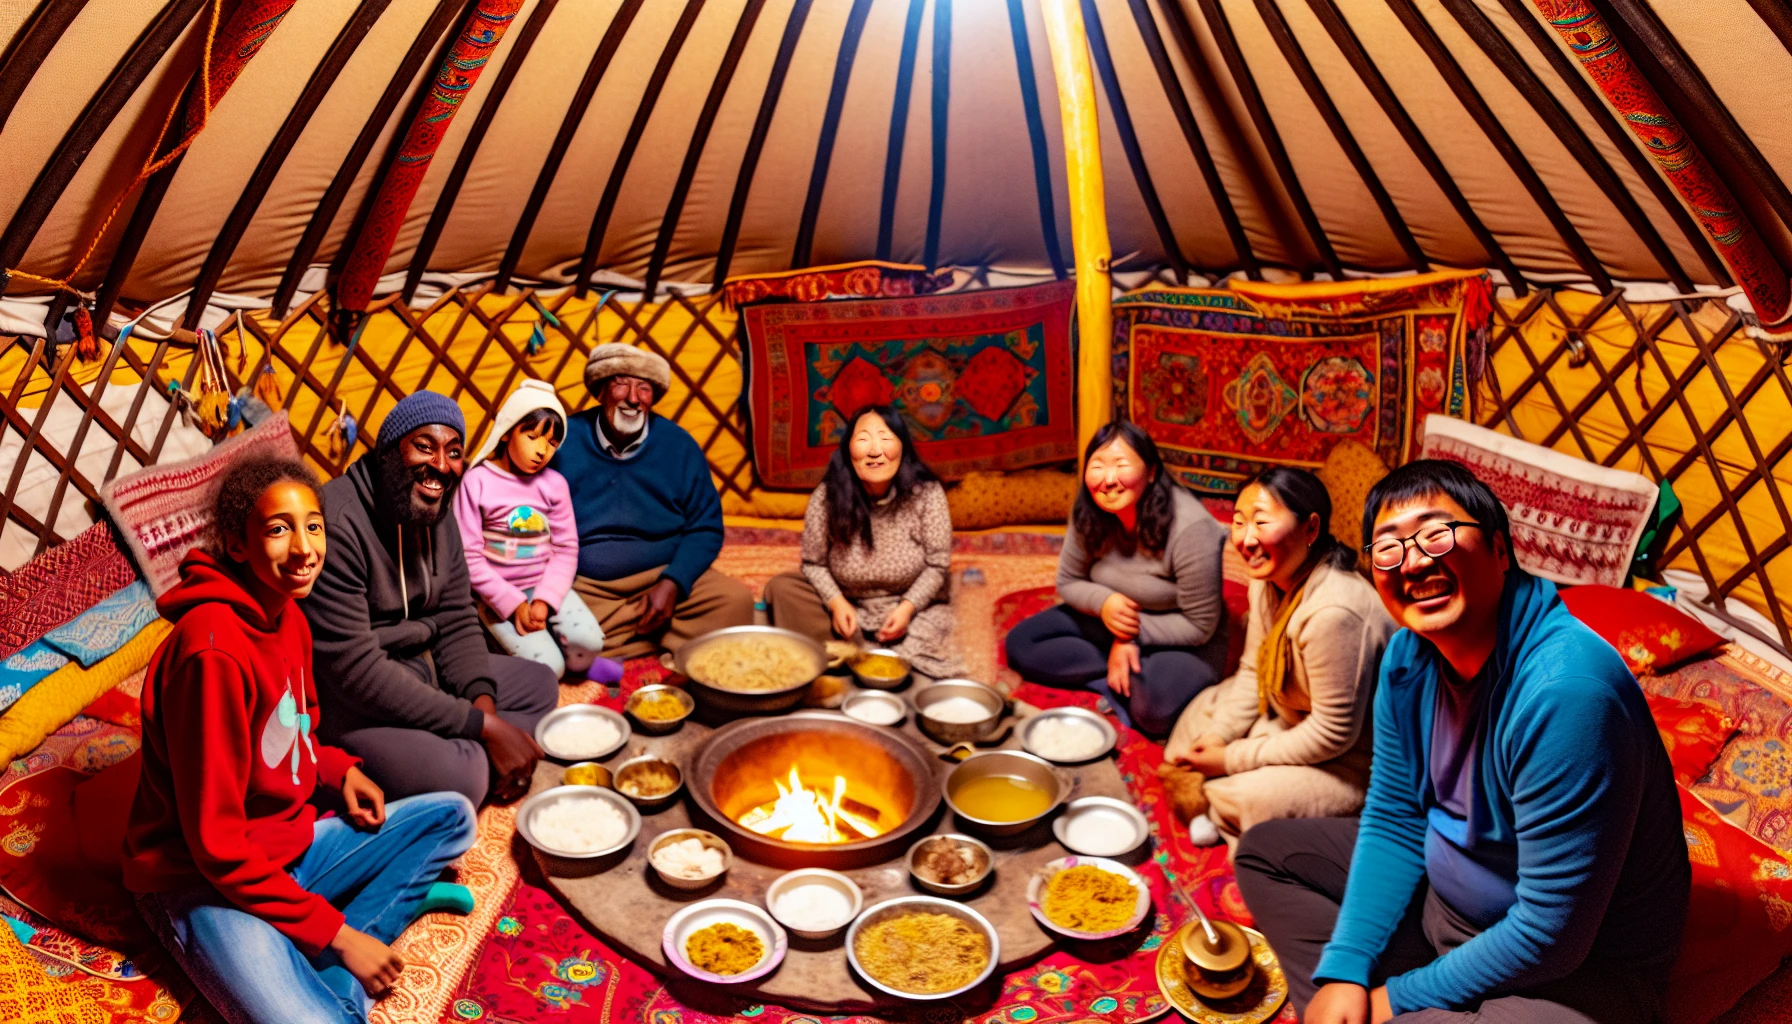 Sharing a traditional Mongolian meal with a nomadic family